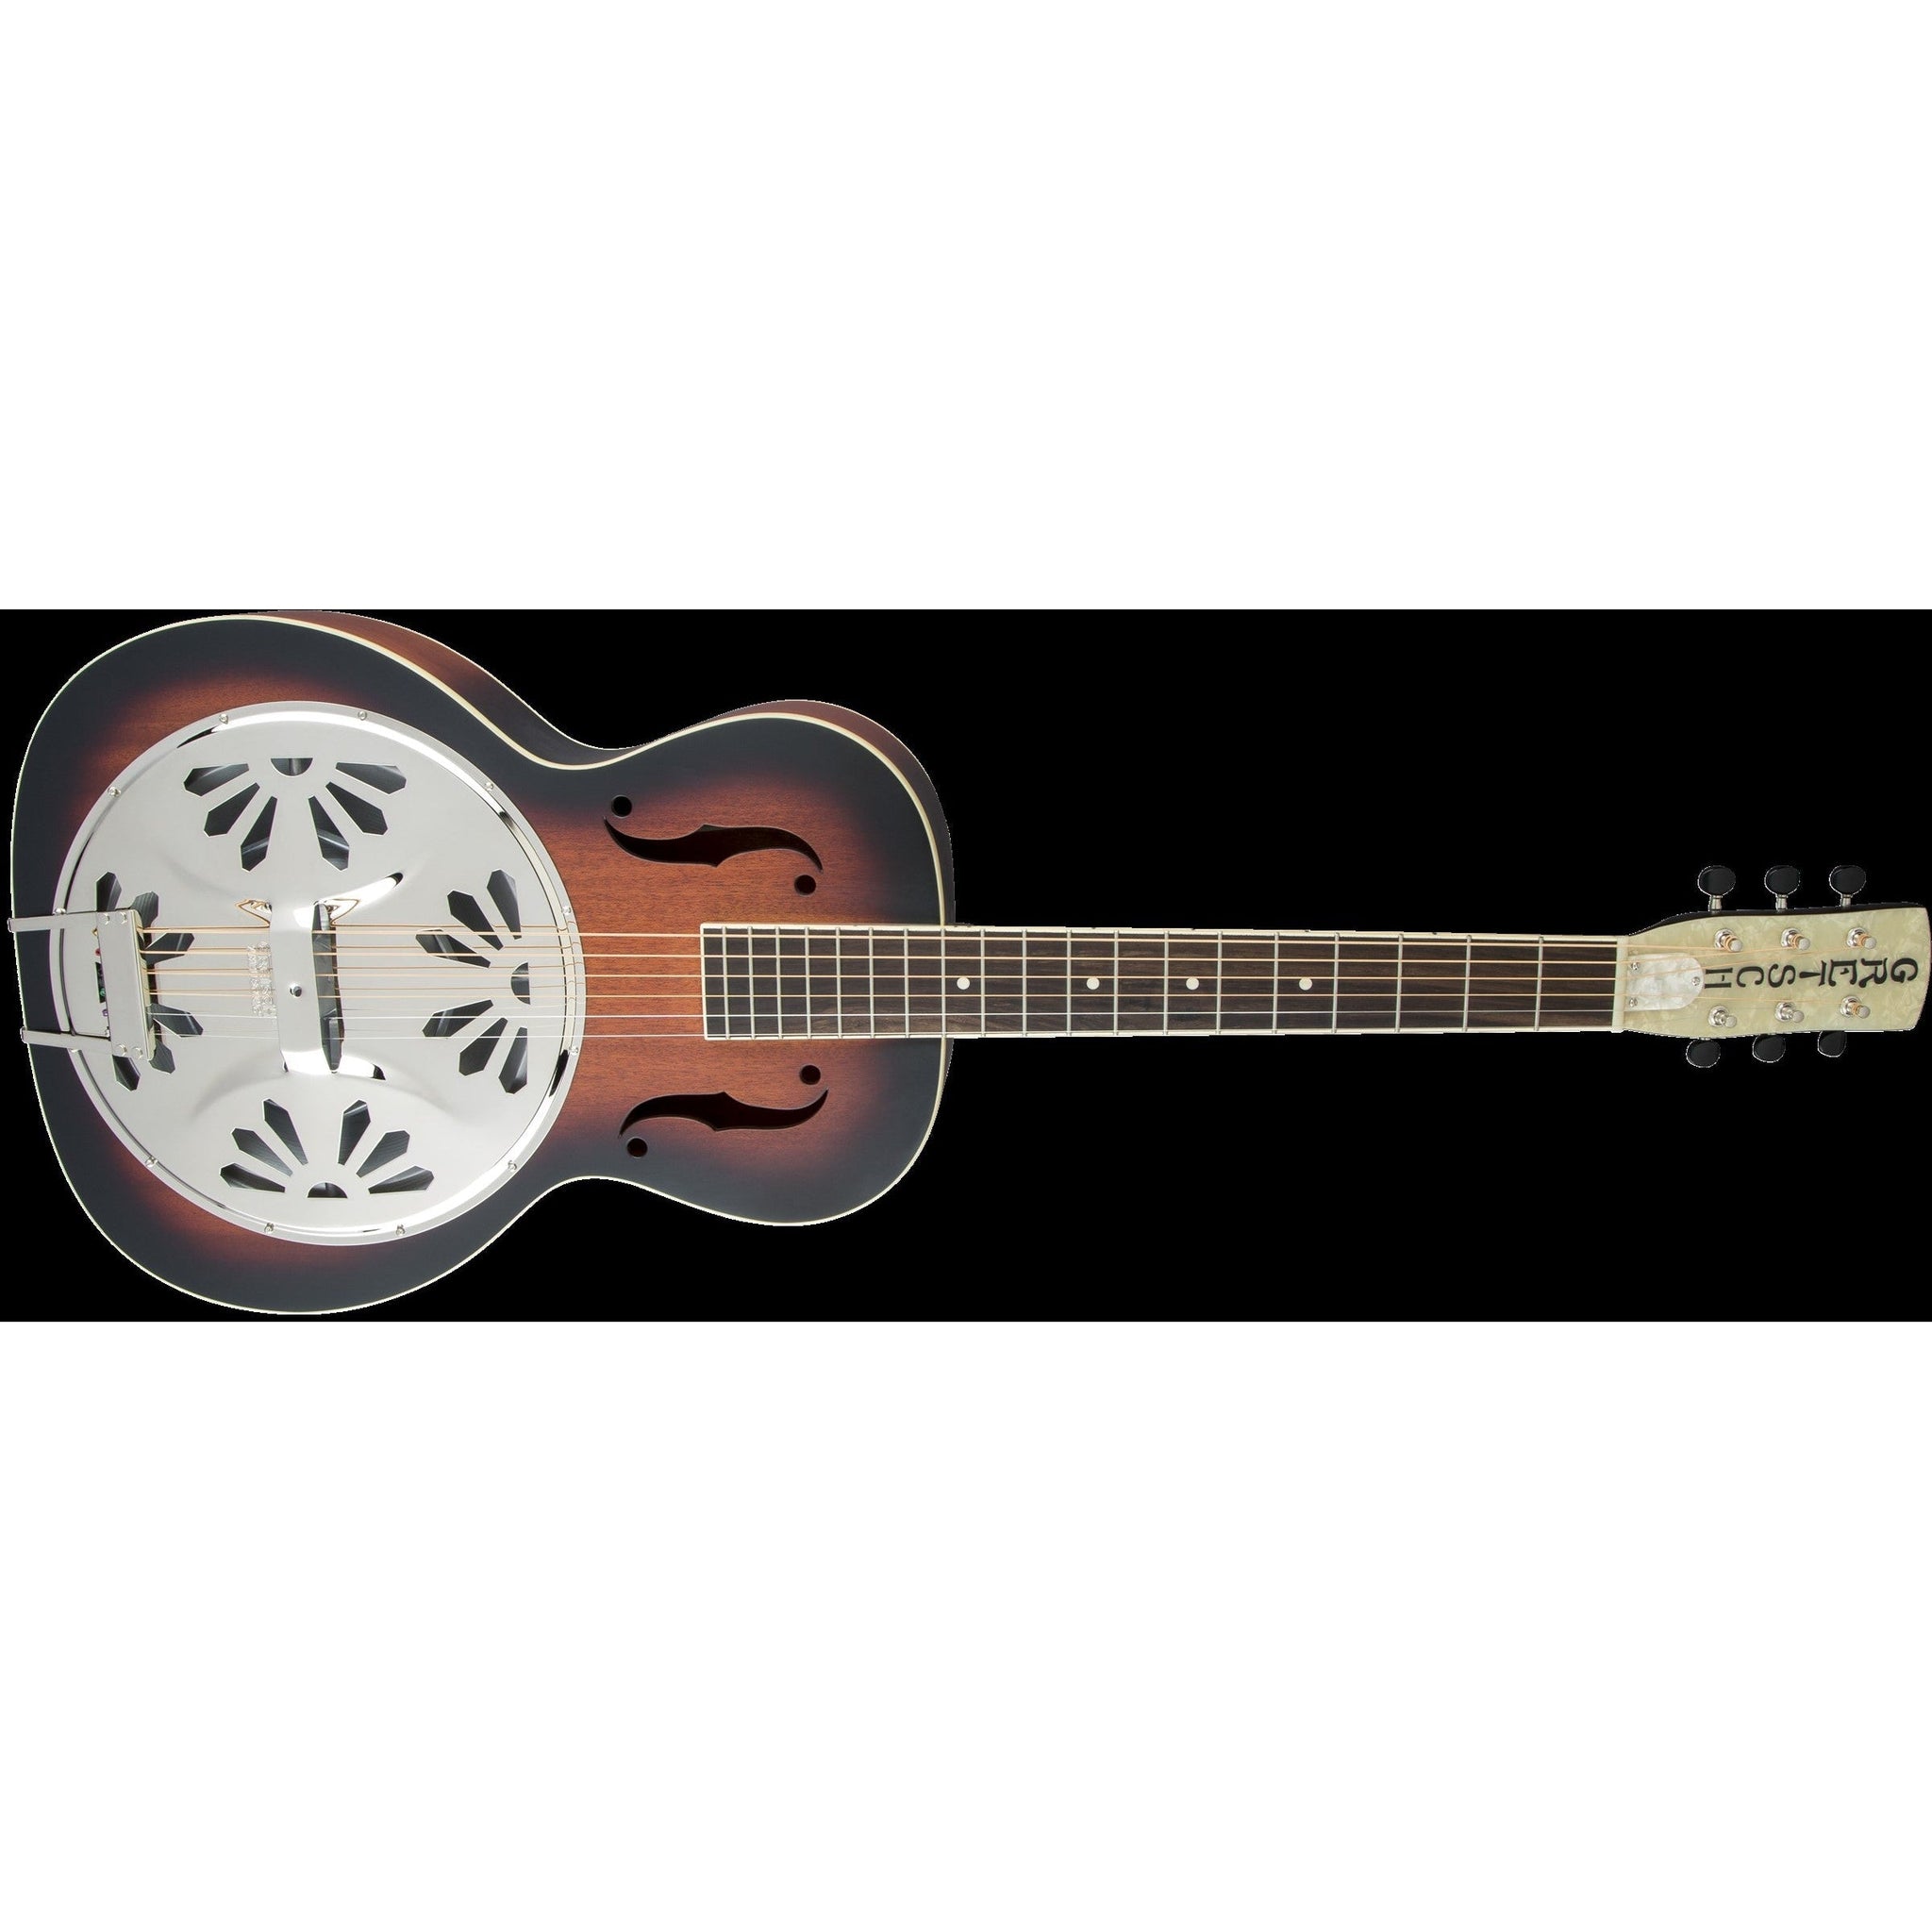 Gretsch G9220 Roots Collection Bobtail Round Neck Resonator Acoustic/Electric Guitar 2-Color Sunburst-Music World Academy